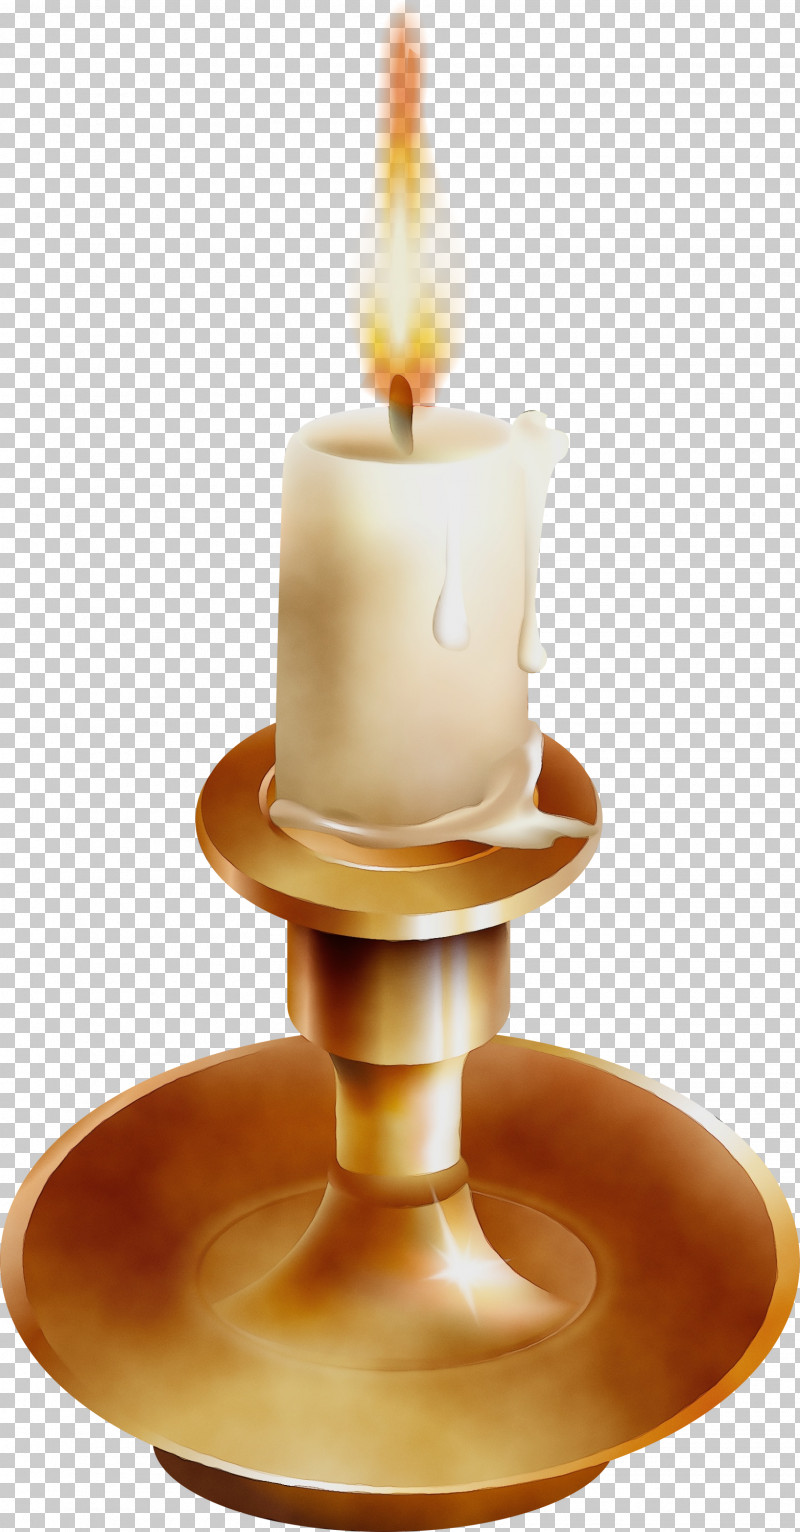 Candle Lighting Candle Holder Oil Lamp Wax PNG, Clipart, Candle, Candle Holder, Interior Design, Lighting, Metal Free PNG Download